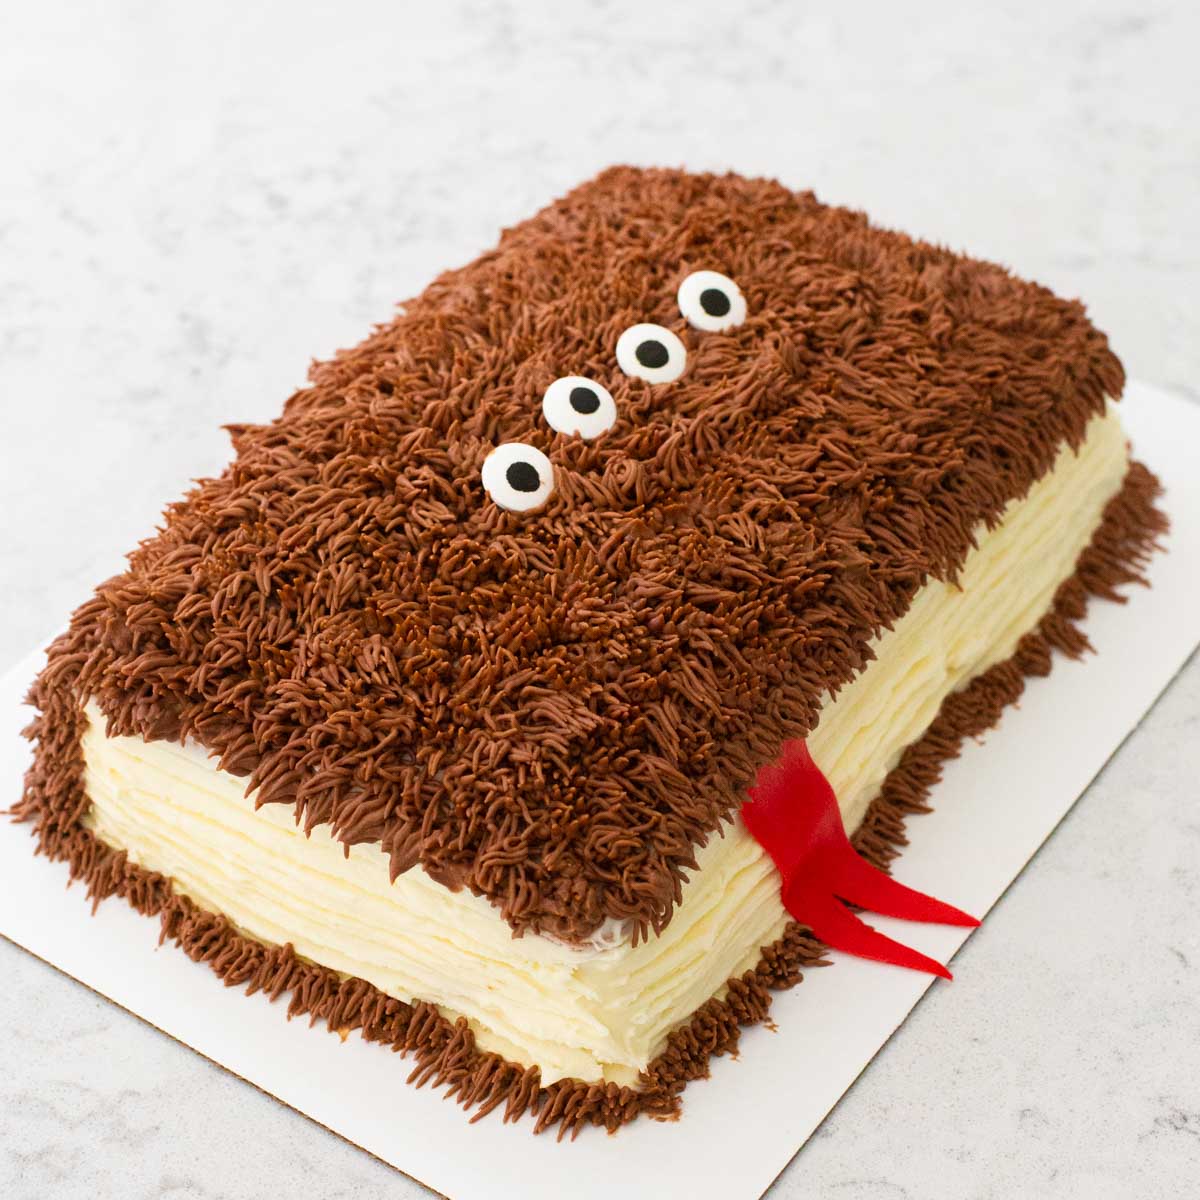 A Harry Potter "Monsters Book of Monsters" birthday cake has shaggy brown frosting like fur and a red tongue and googly eyes.